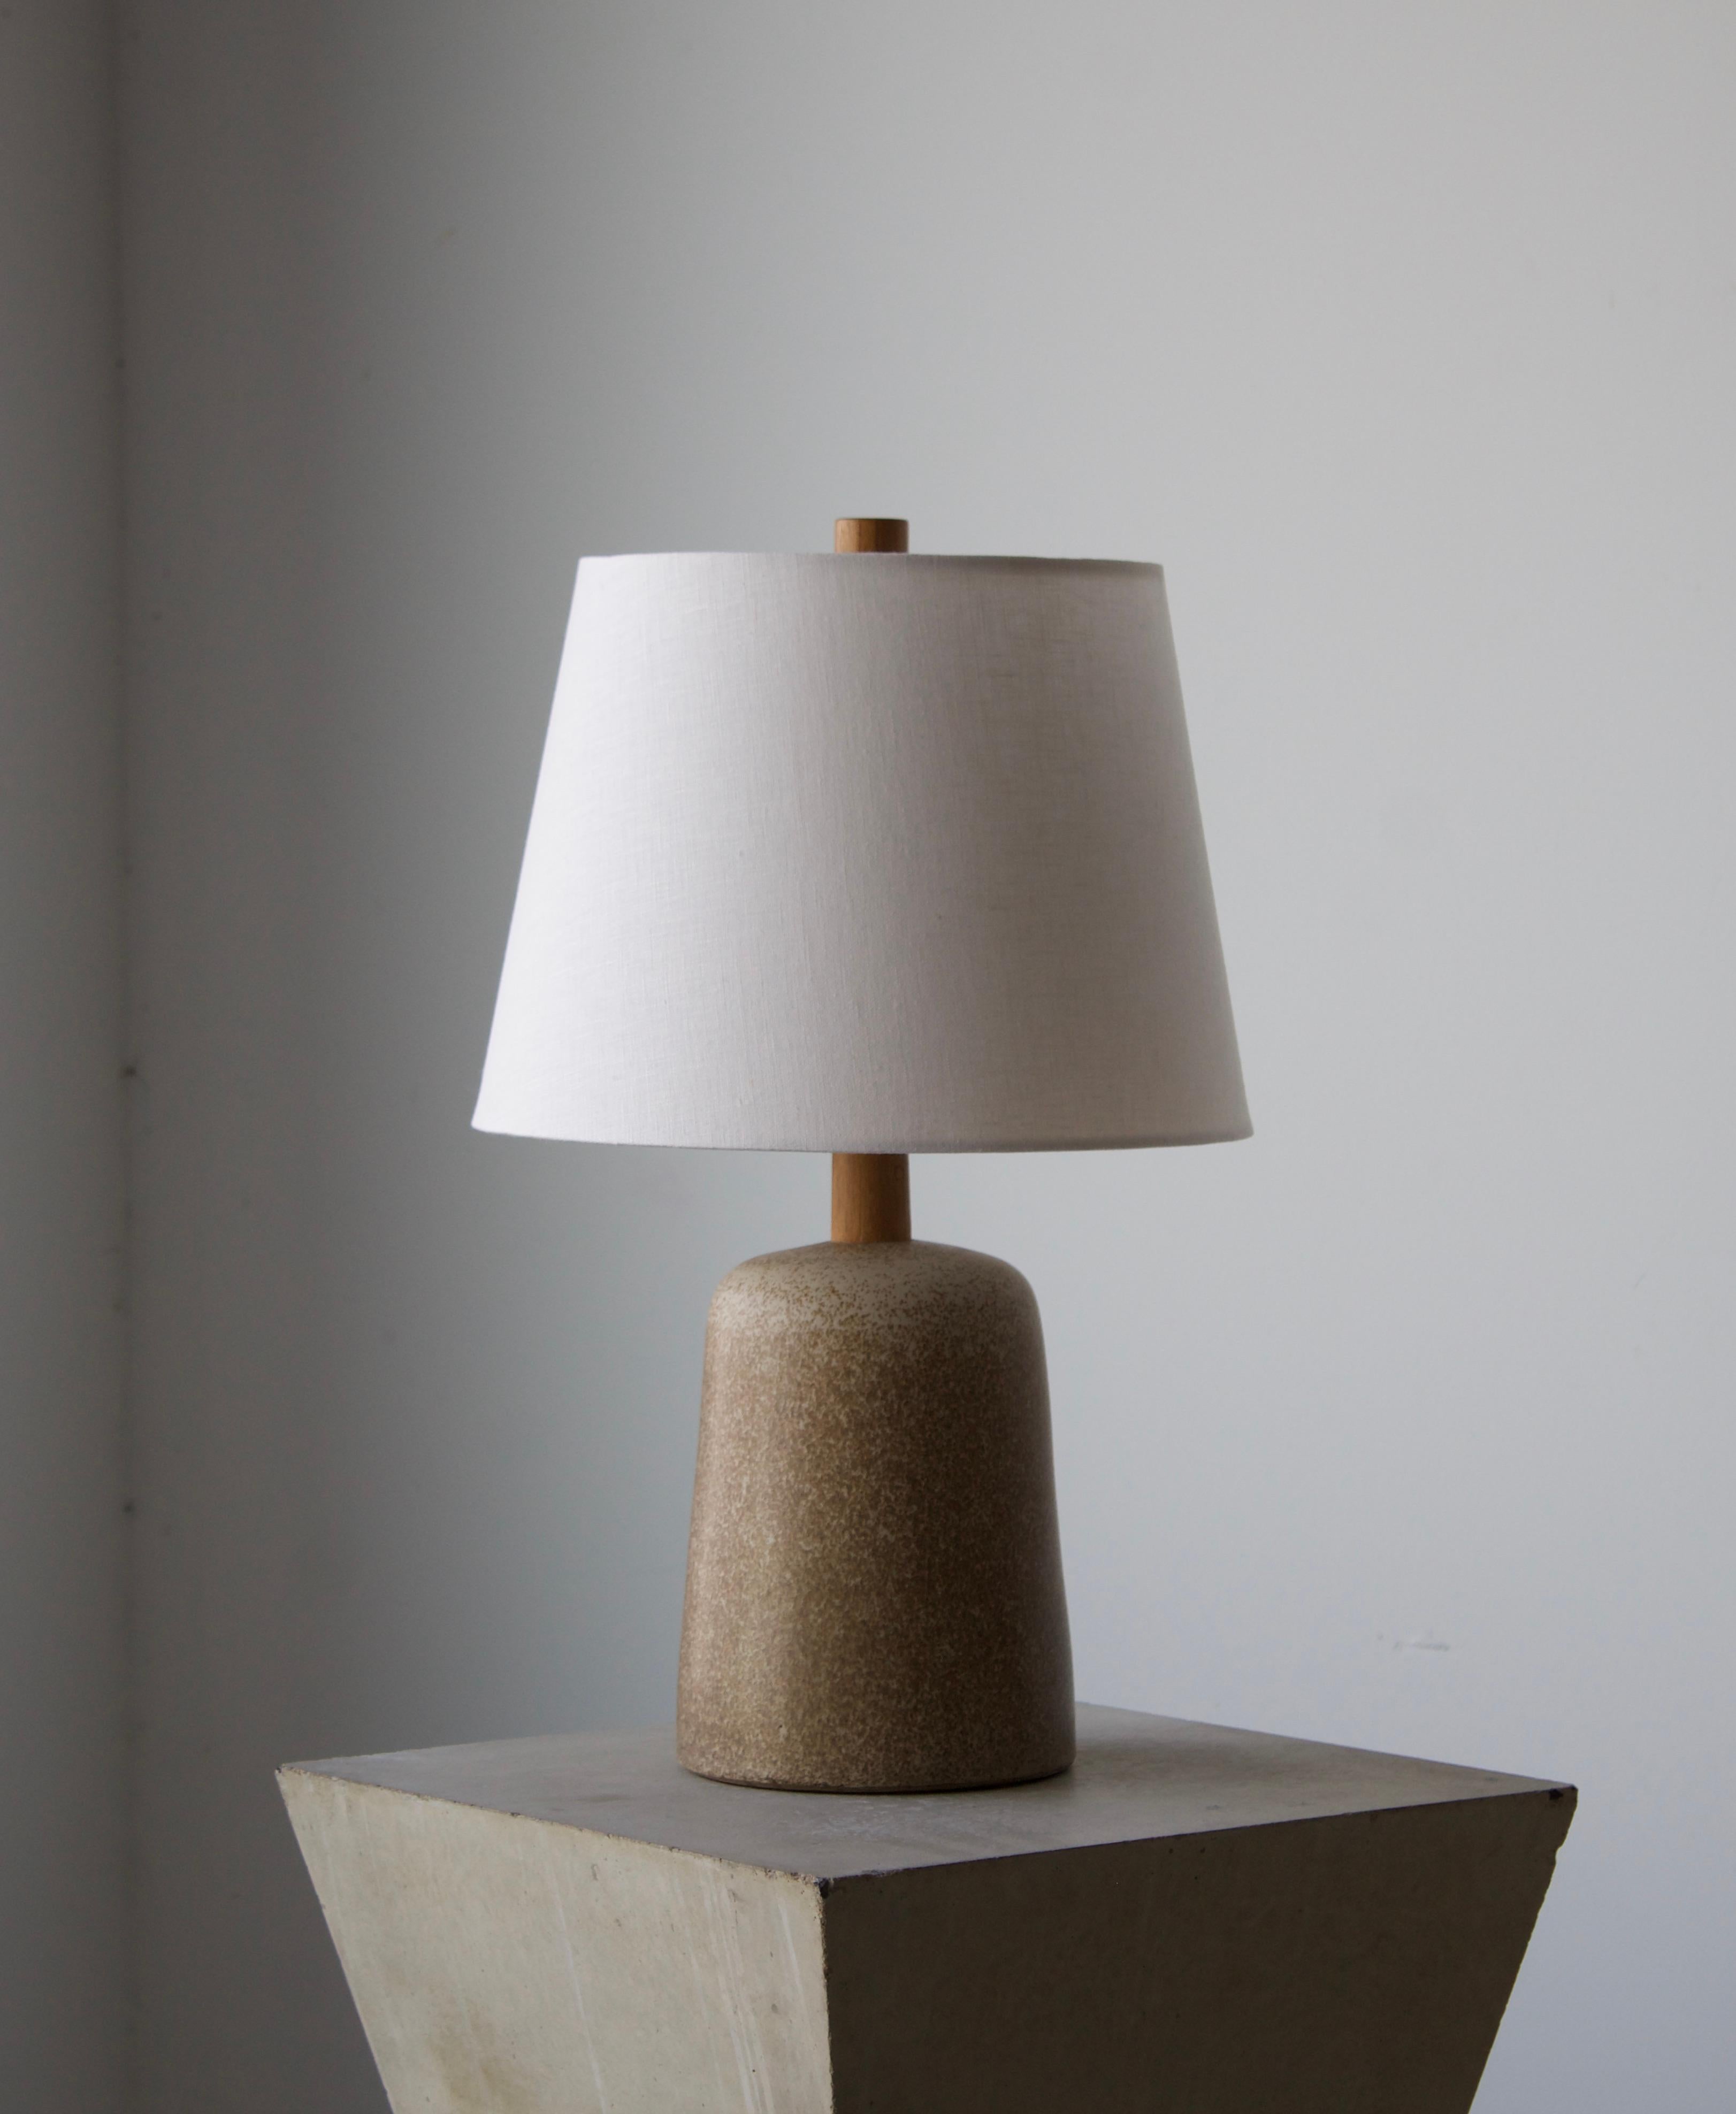 A table lamp designed by husband and wife duo Jane & Gordon Martz. Produced by Marshall Studios, Indianapolis. 

The base is slip-cast and then dipped into glaze. Design also incorporates exquisite walnut neck and finial. Base is signed.

Sold